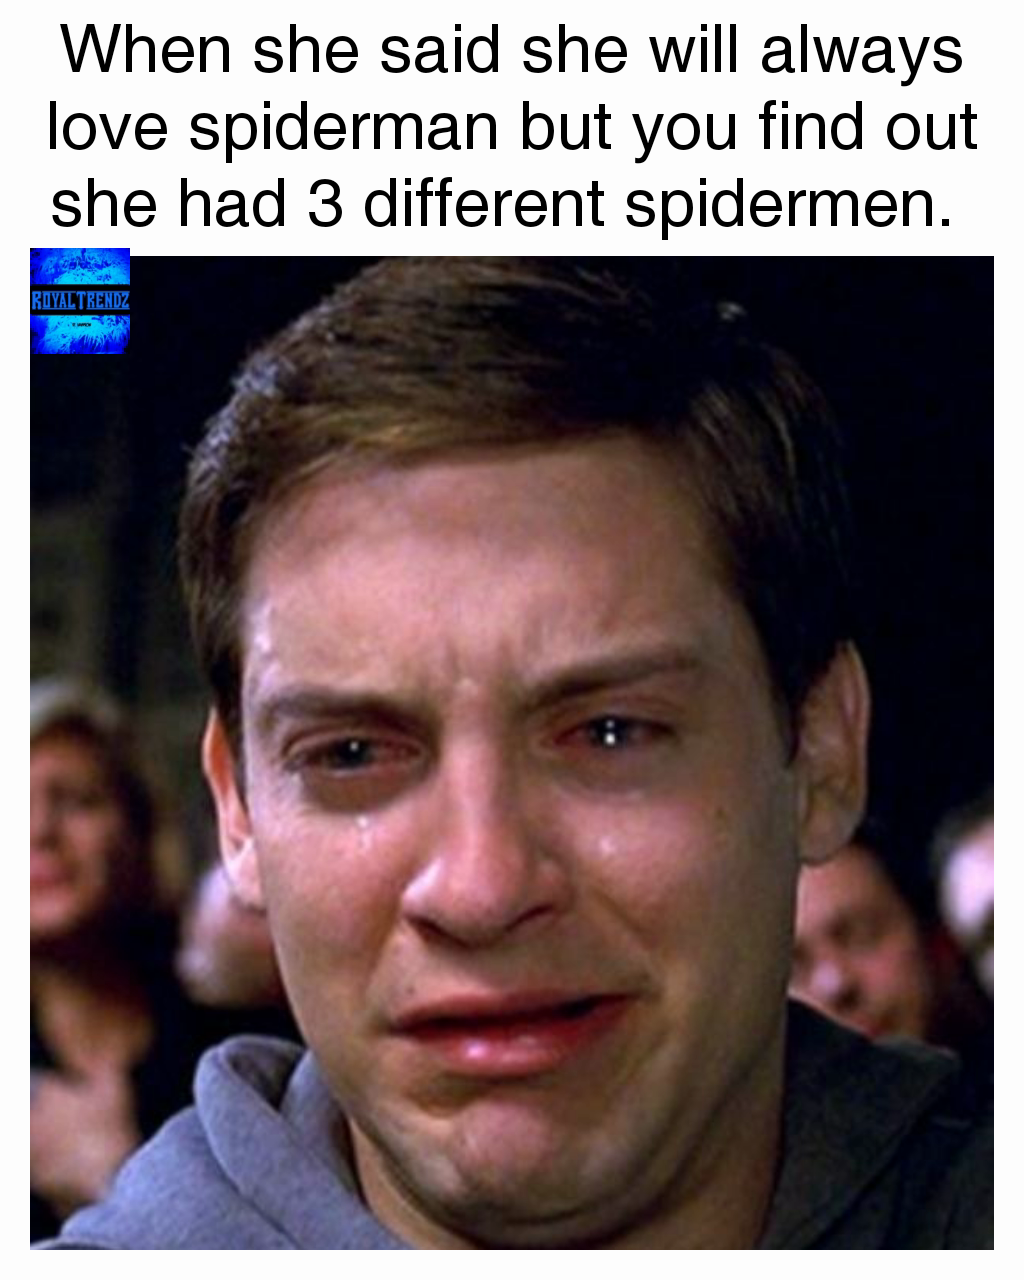 When she said she will always love spiderman but you find out she had 3 different spidermen. 